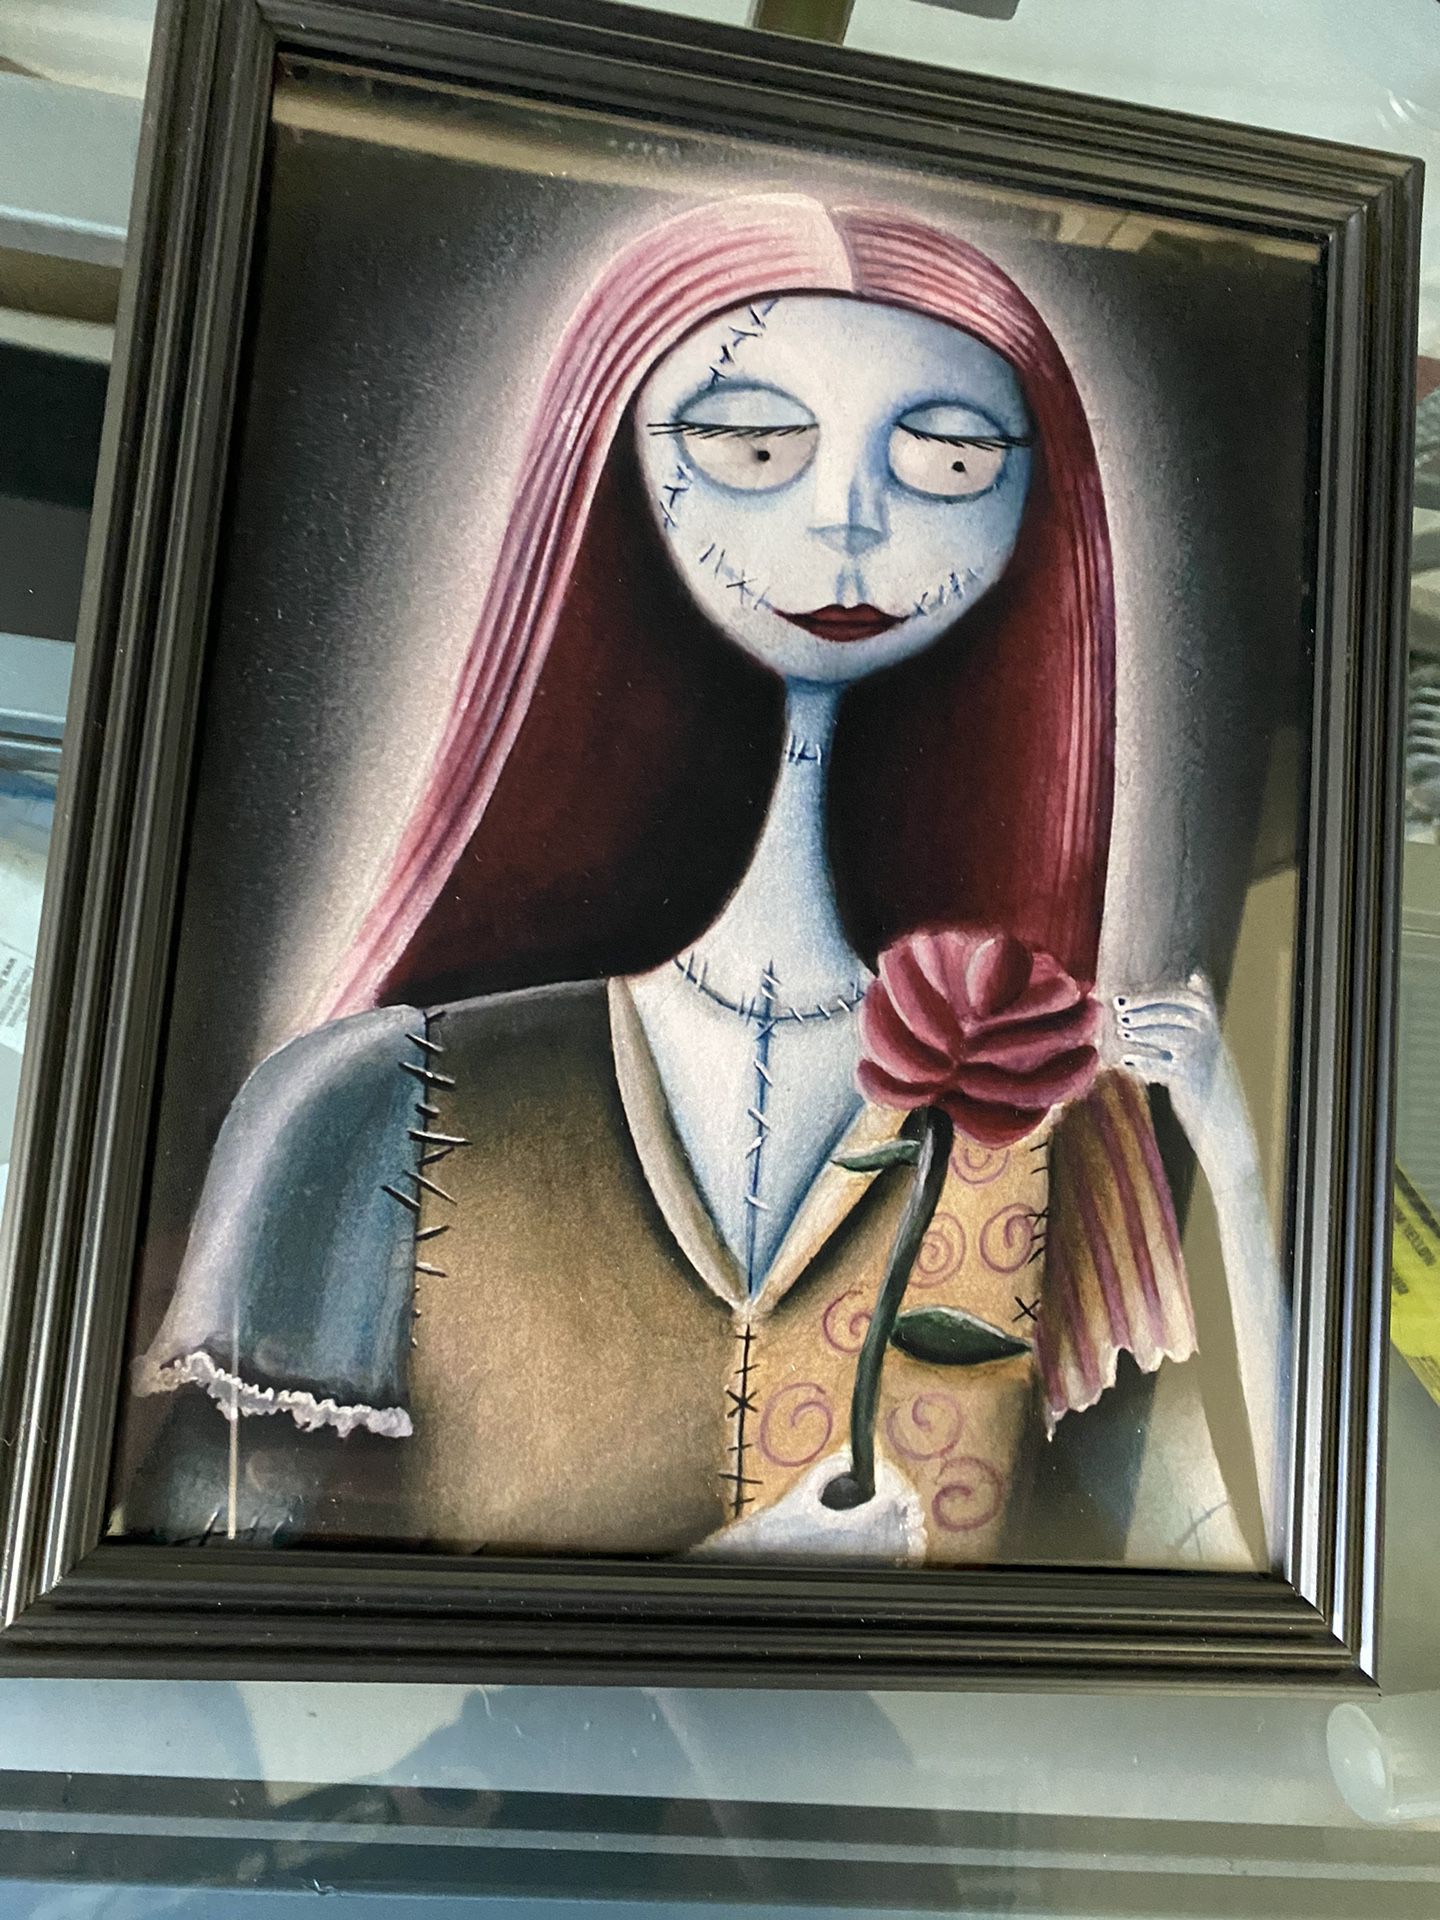 Sally Painting - Framed - 8x10 in